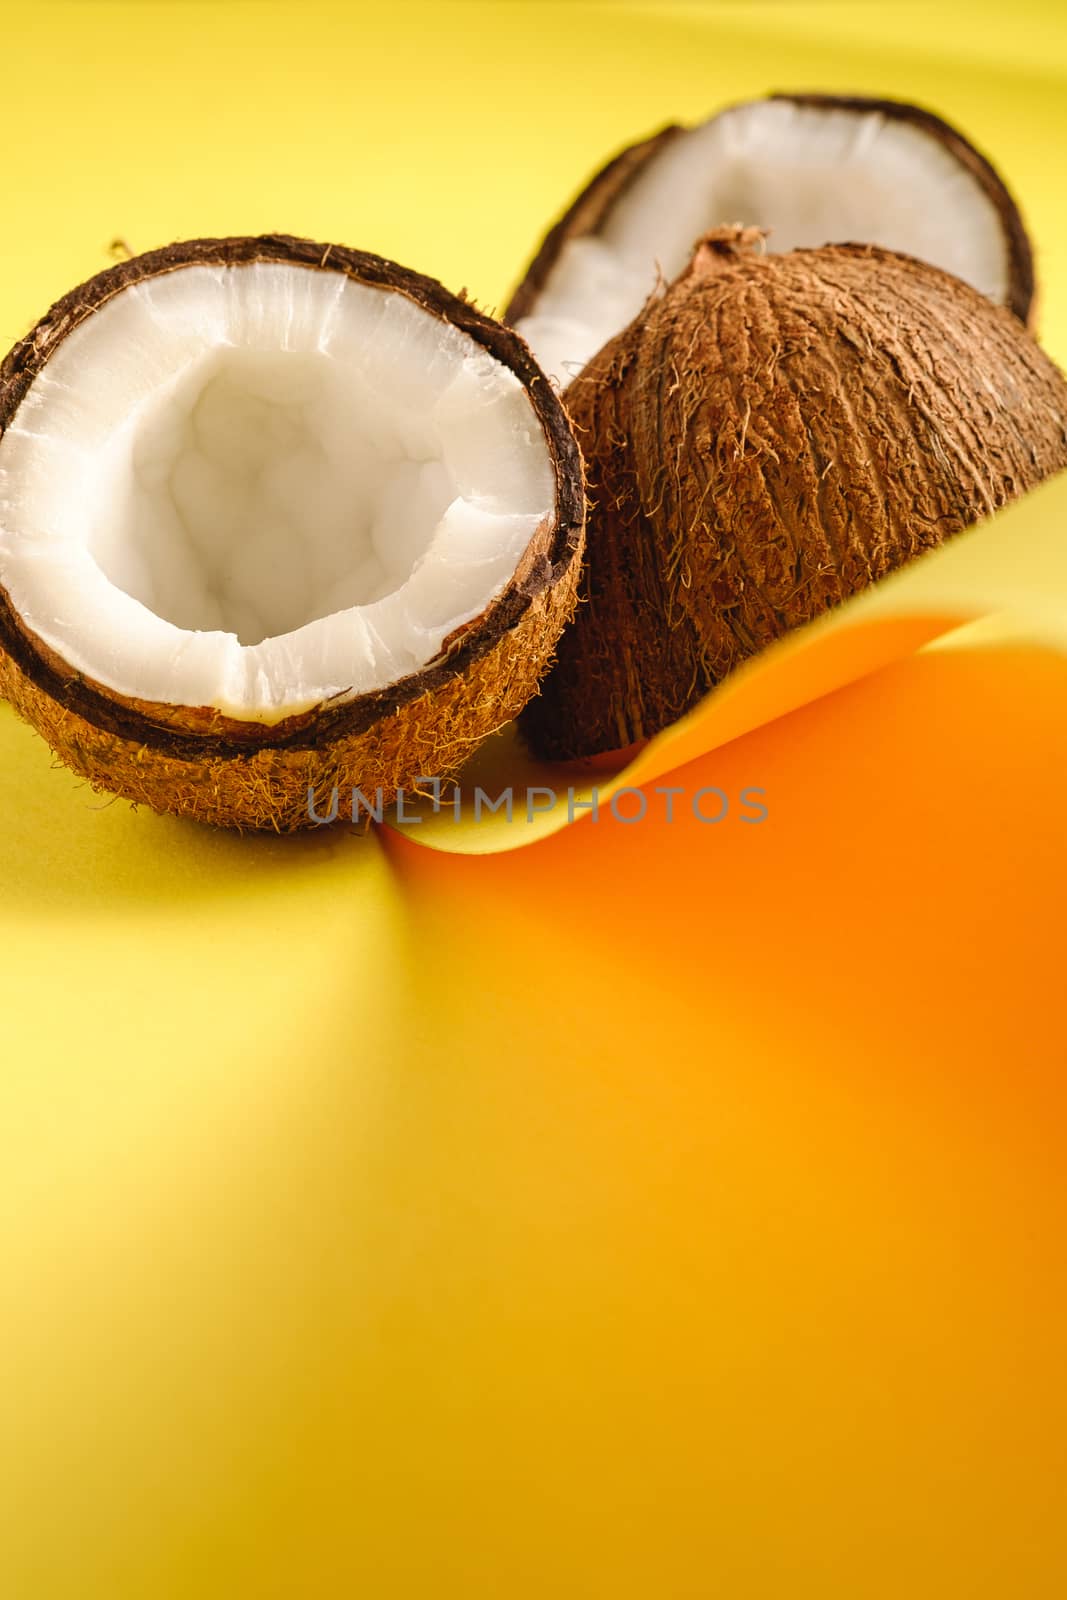 Coconut fruits on folded paper yellow plain background, abstract food tropical concept, angle view